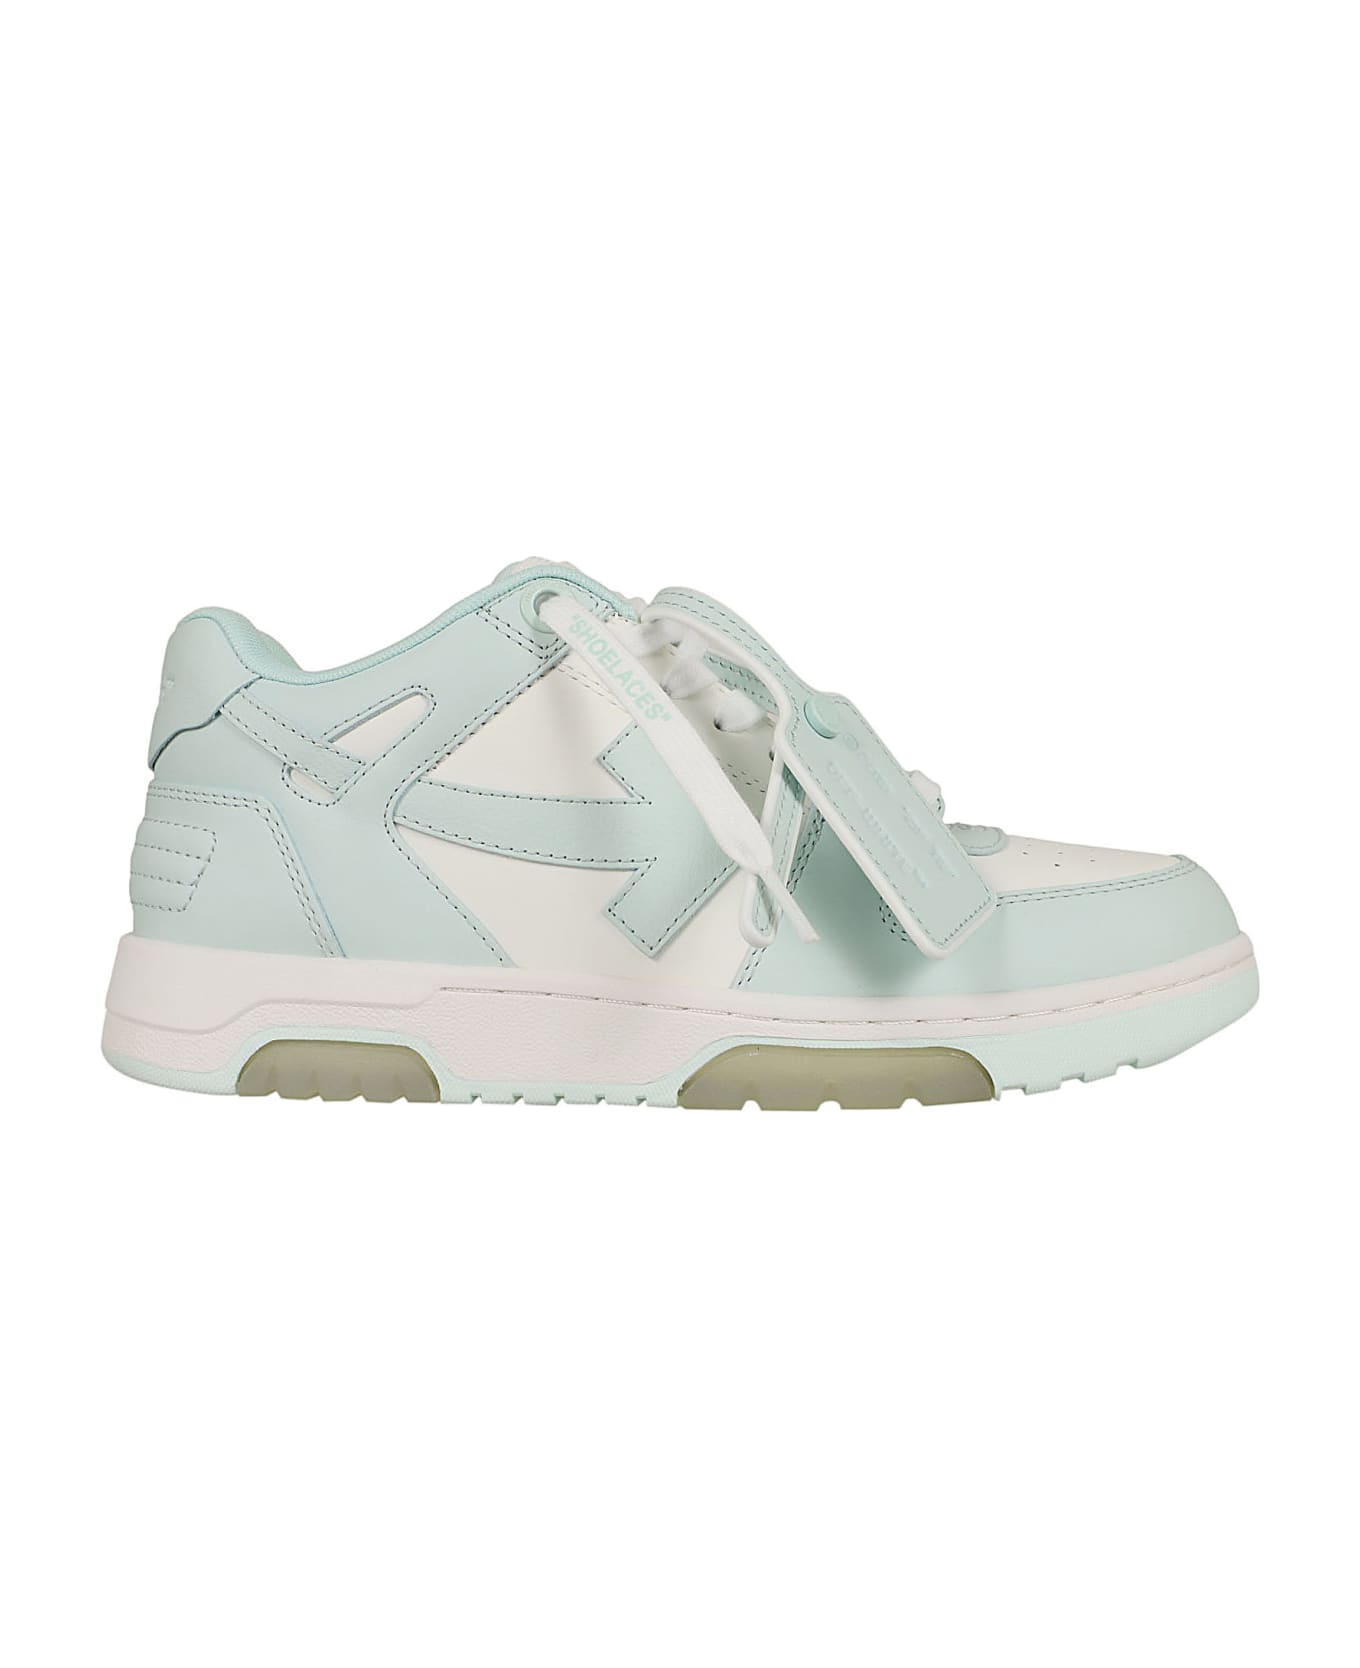 Off-White Out Of Office Sneakers - White Seafoa スニーカー